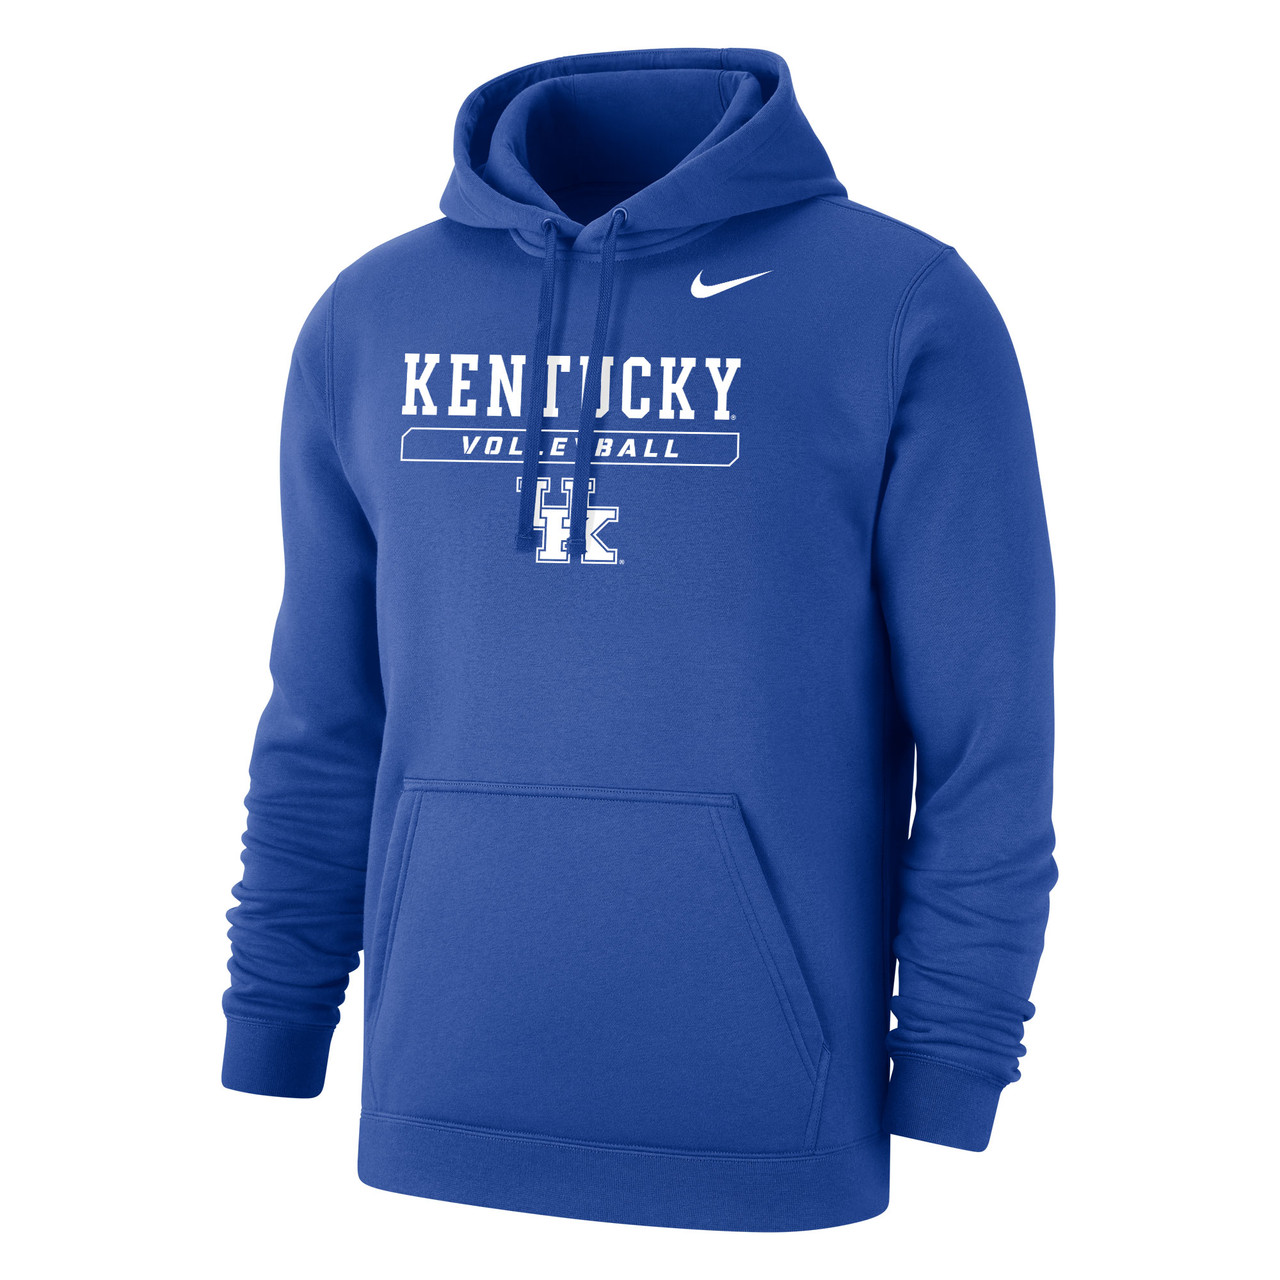 NIKE CLUB FLEECE PULL OVER HOODIE - Team Outfitters